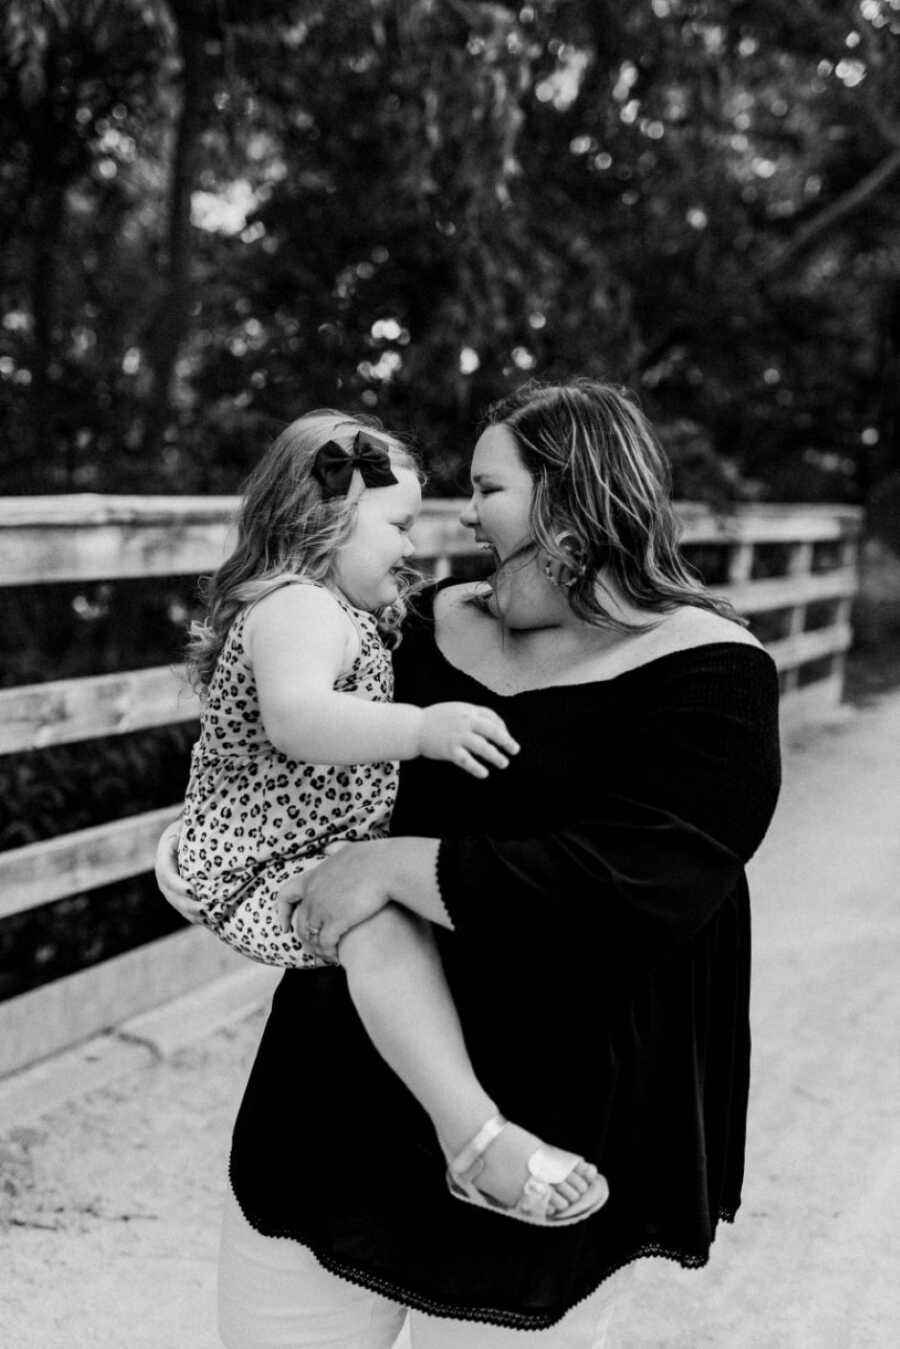 Mom and daughter take candid photo dancing on a bridge during family photoshoot